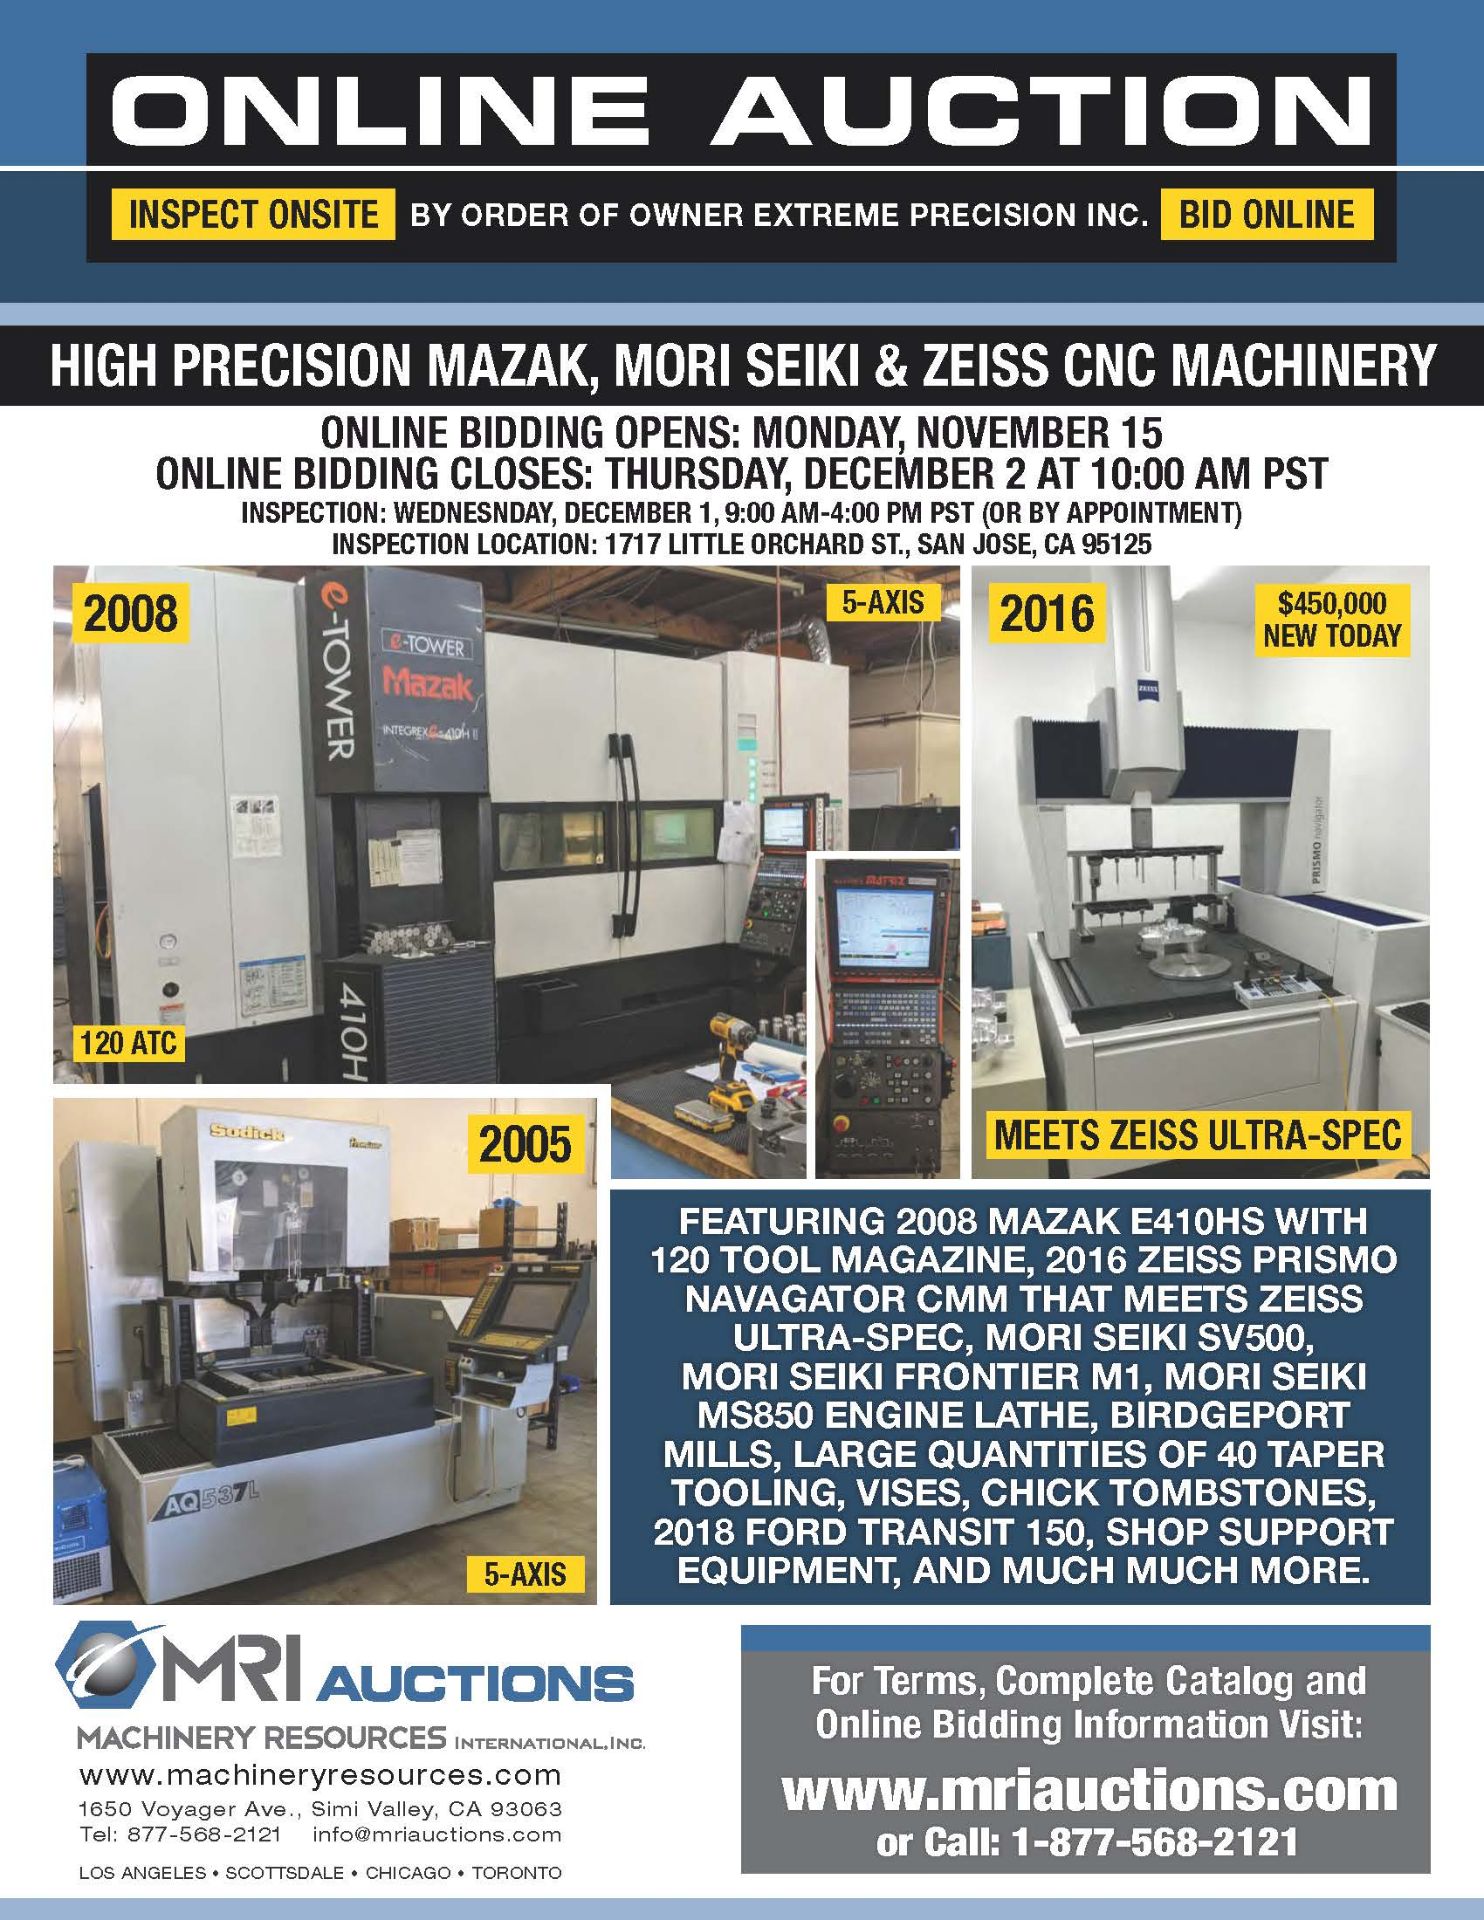 FEATURING: MORI SEIKI ZEISS, SHOP SUPPORT EQUIPMENT, AND MUCH MUCH MORE